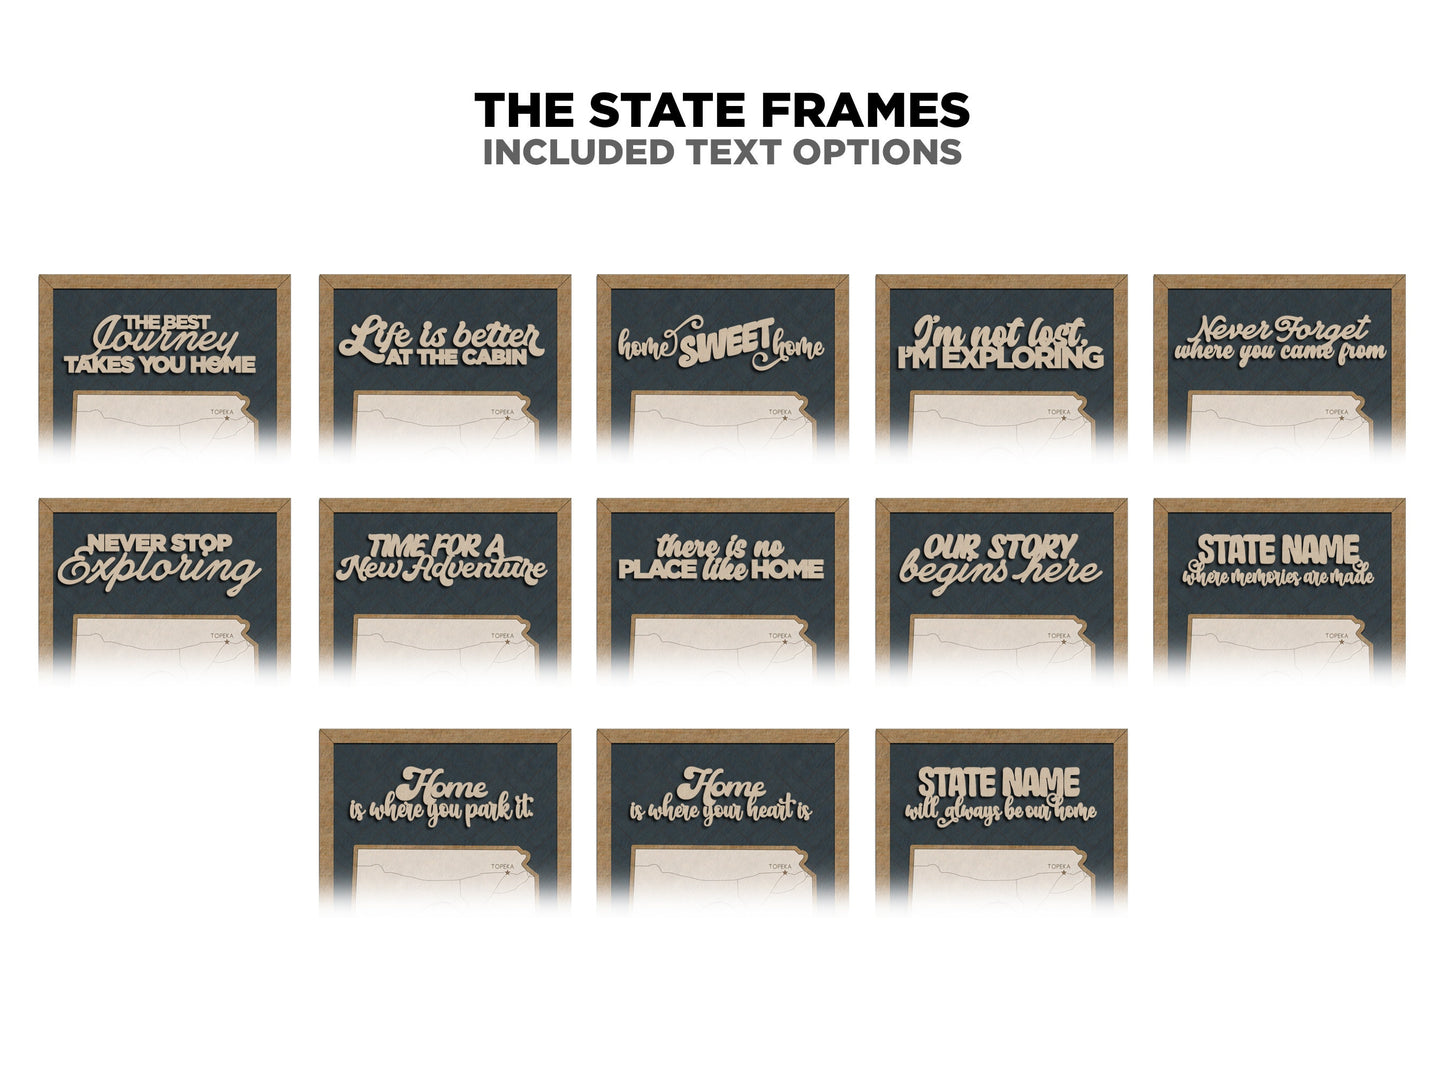 The Nebraska State Frame - 13 text options, 12 backgrounds, 25 icons Included - Make over 7,500 designs - Glowforge & Lightburn Tested